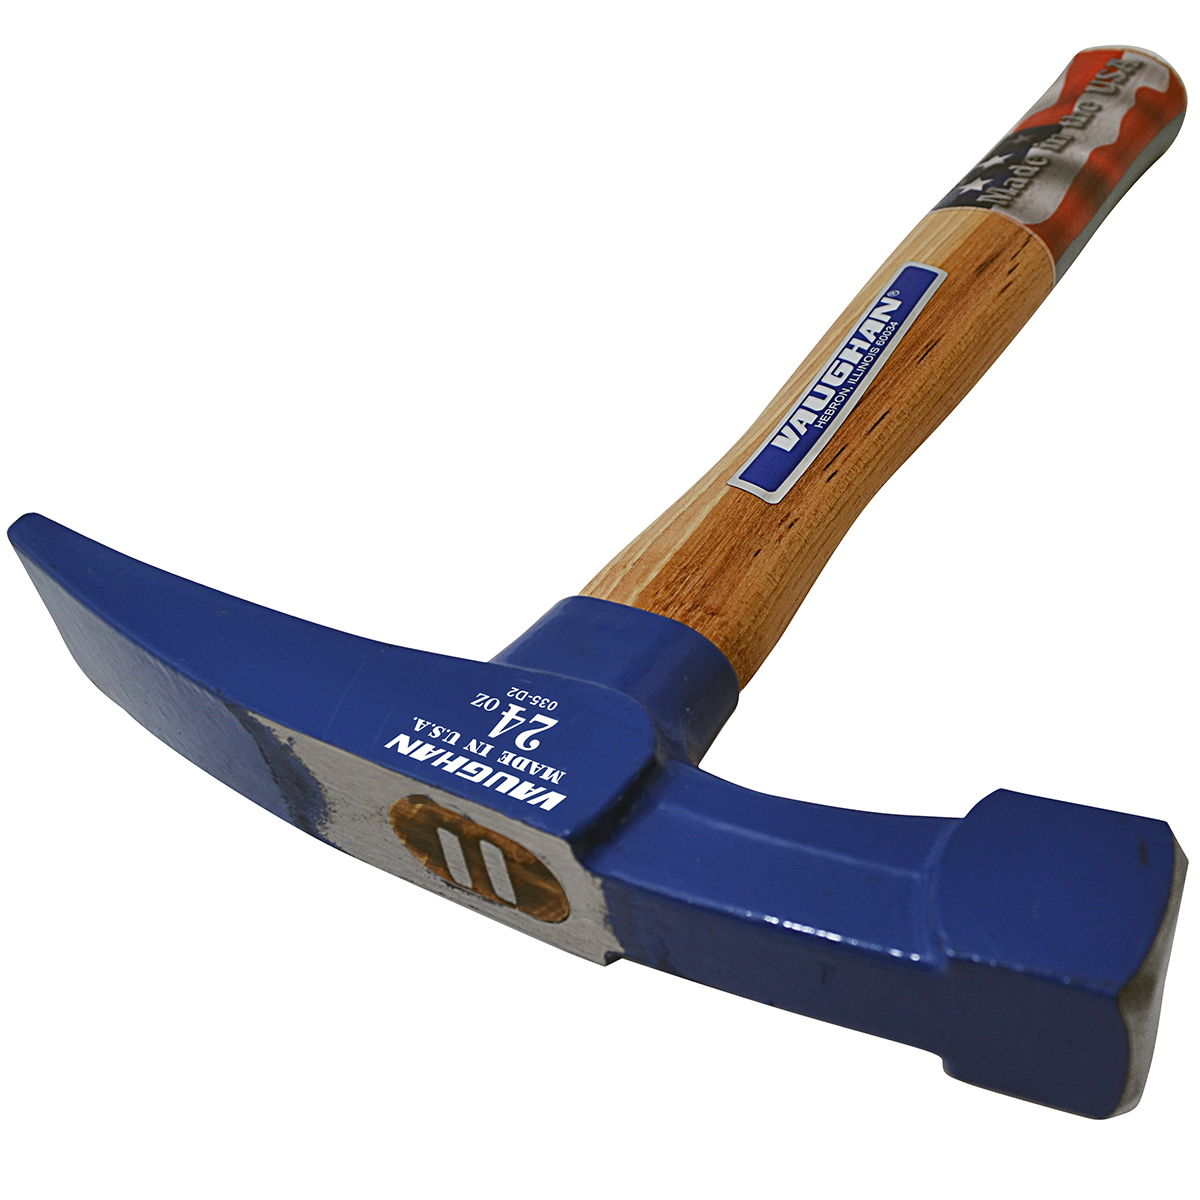 Estwing Bricklayer or Mason's Hammers, 24 oz, 11 in, Steel Handle, 1/EA